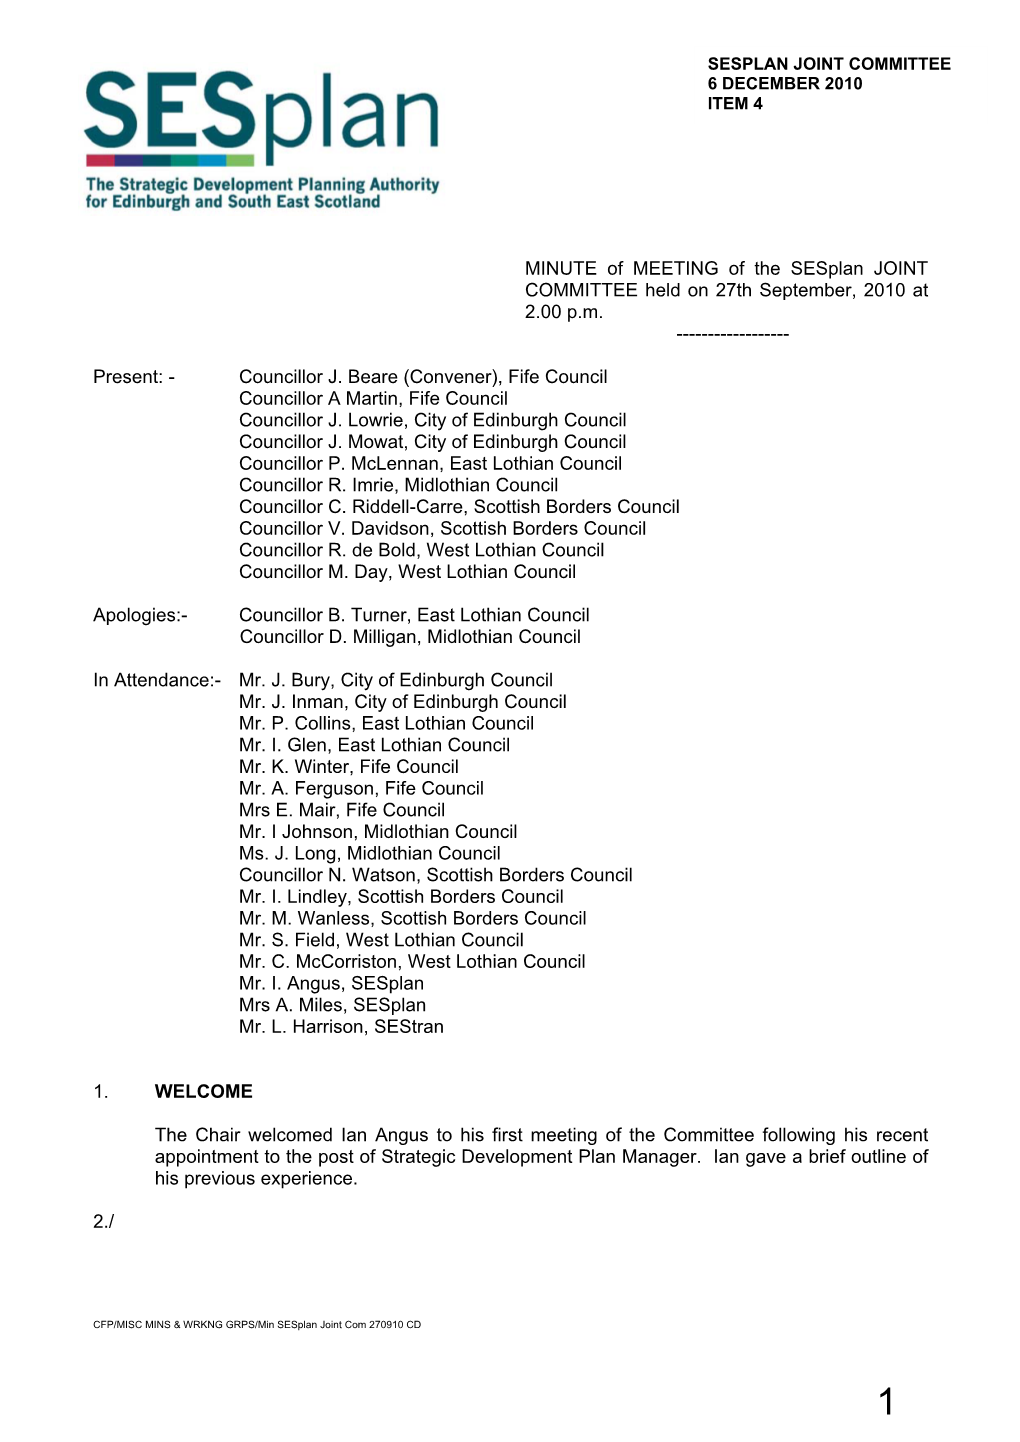 MINUTE of MEETING of the Sesplan JOINT COMMITTEE Held on 27Th September, 2010 at 2.00 P.M